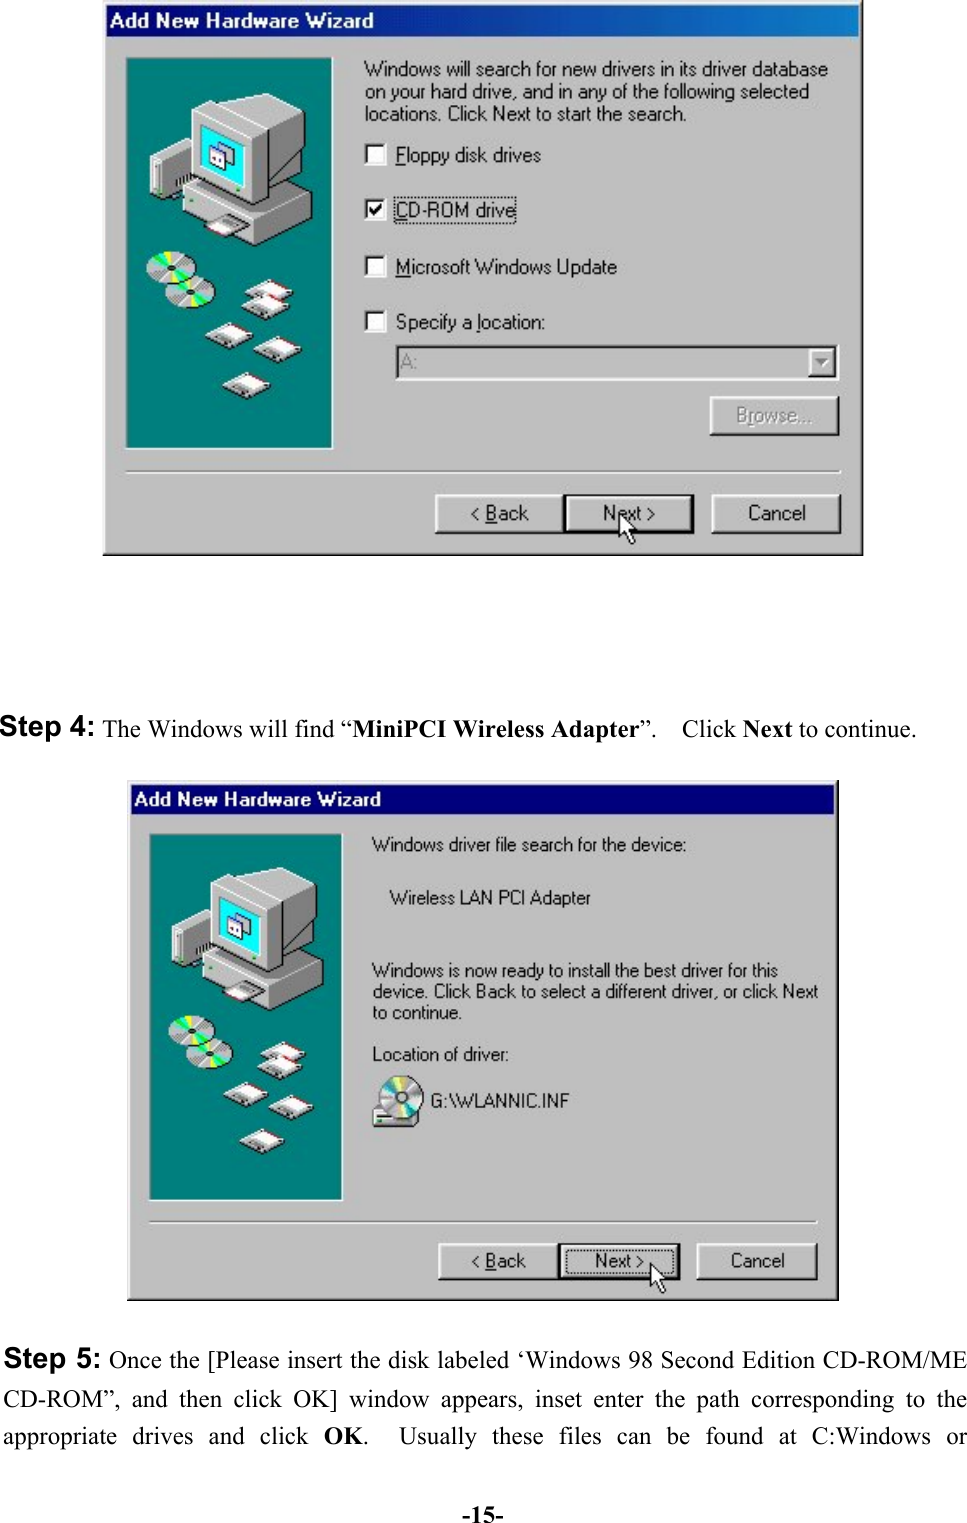 -15-Step 4: The Windows will find “MiniPCI Wireless Adapter”.  Click Next to continue.Step 5: Once the [Please insert the disk labeled ‘Windows 98 Second Edition CD-ROM/MECD-ROM”, and then click OK] window appears, inset enter the path corresponding to theappropriate drives and click OK.  Usually these files can be found at C:Windows or